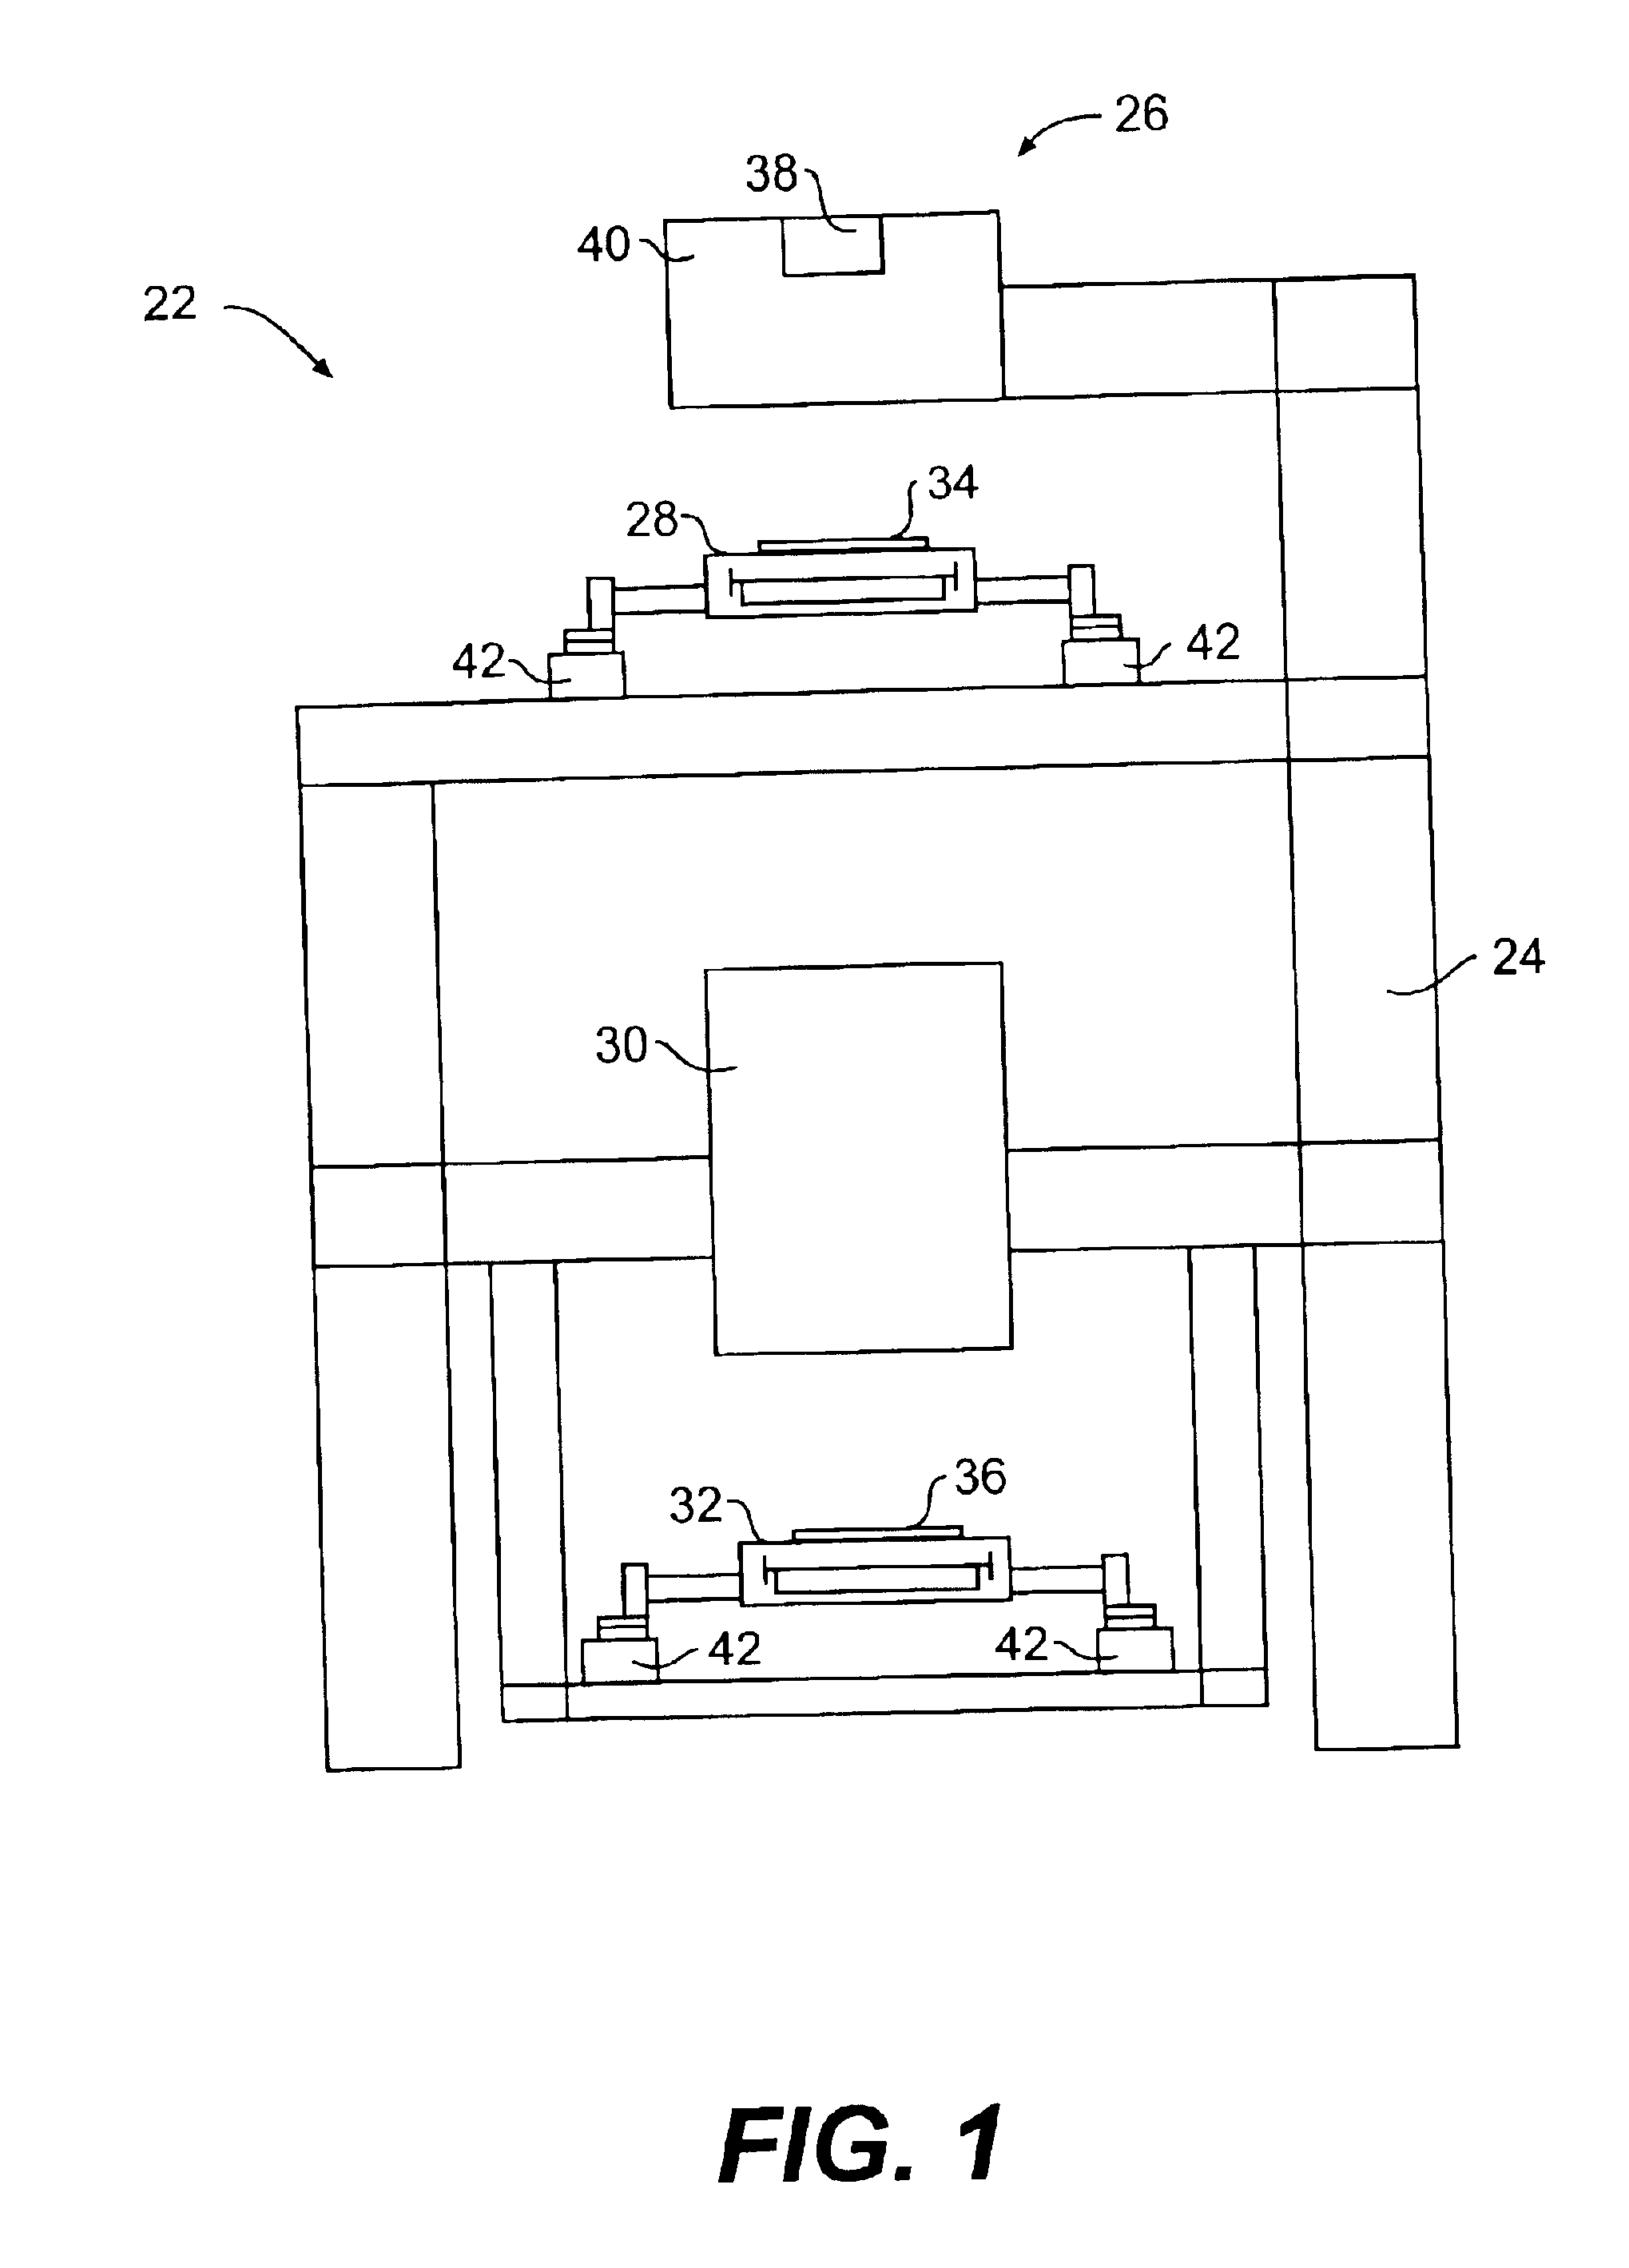 Kinematic optical mounting assembly with flexures